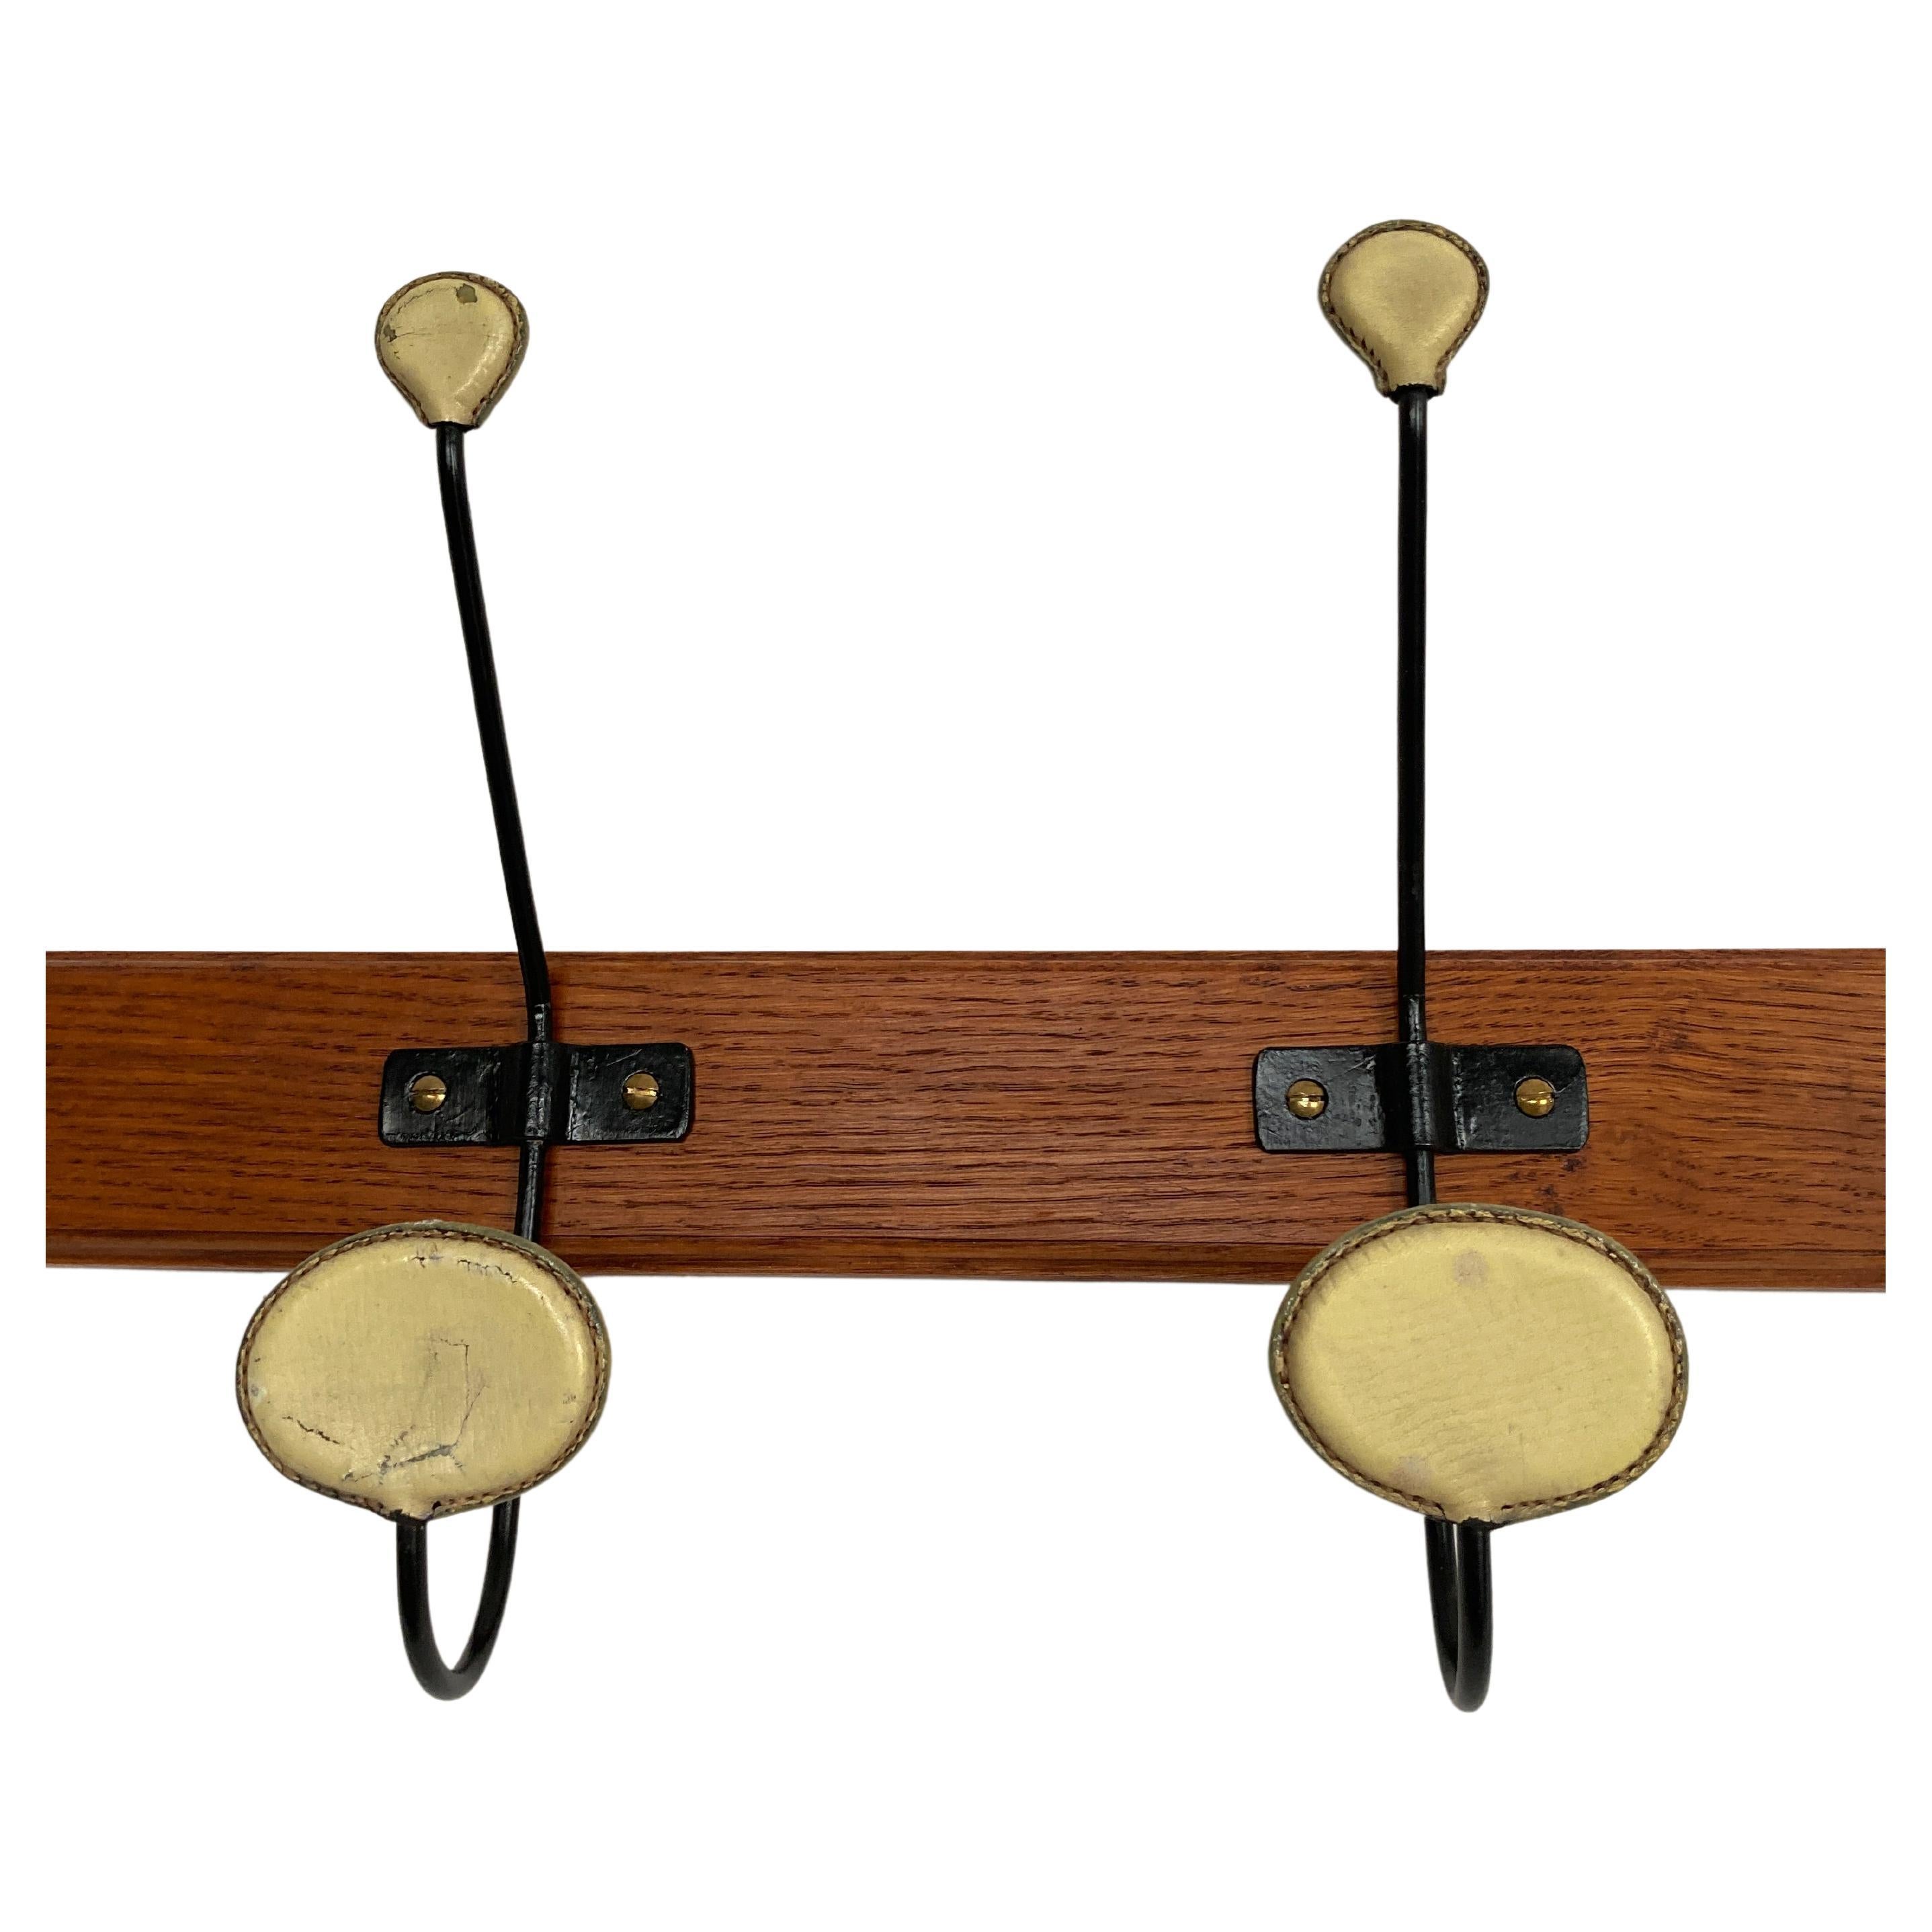 1950's Stitched leather coat rack by Jacques Adnet